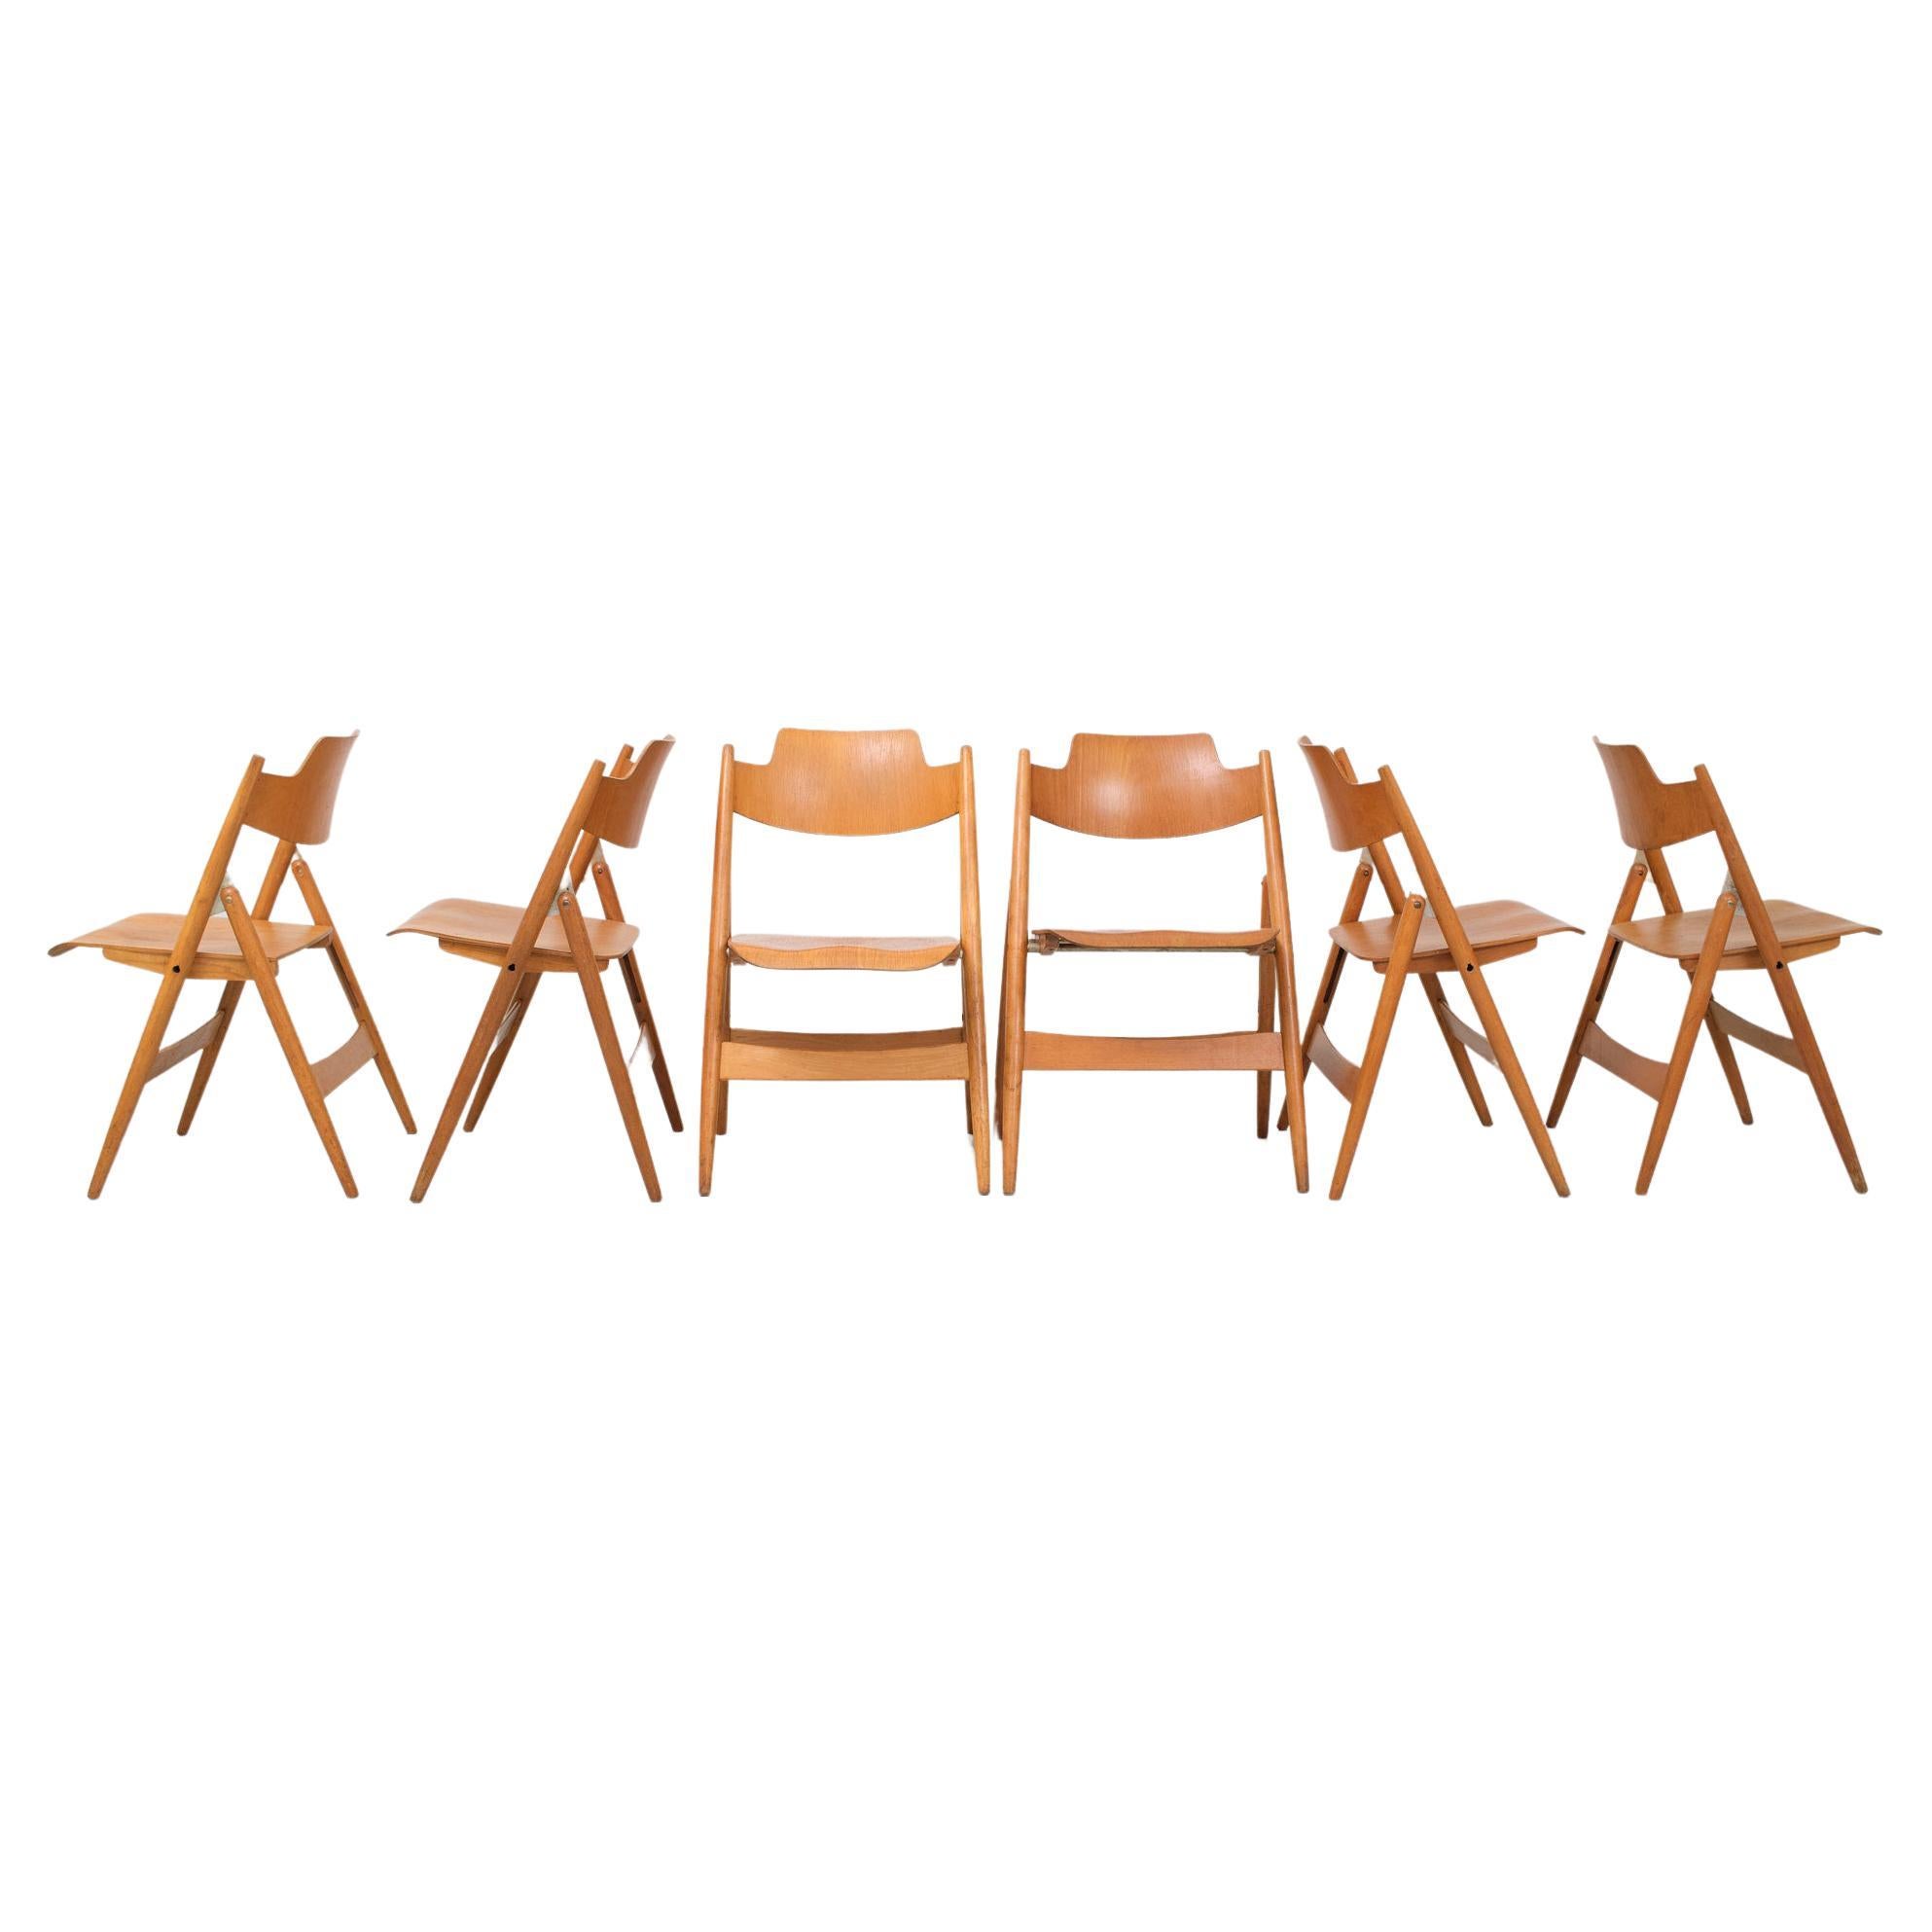 Very nice set of 6 folding chairs model SE18 designed by Egon Eiermann and manufactured by Wilde & Spieth, Germany 1952. These chairs are made of birch plywood and have a very nice folding mechanism. The chairs have a nice body although these are